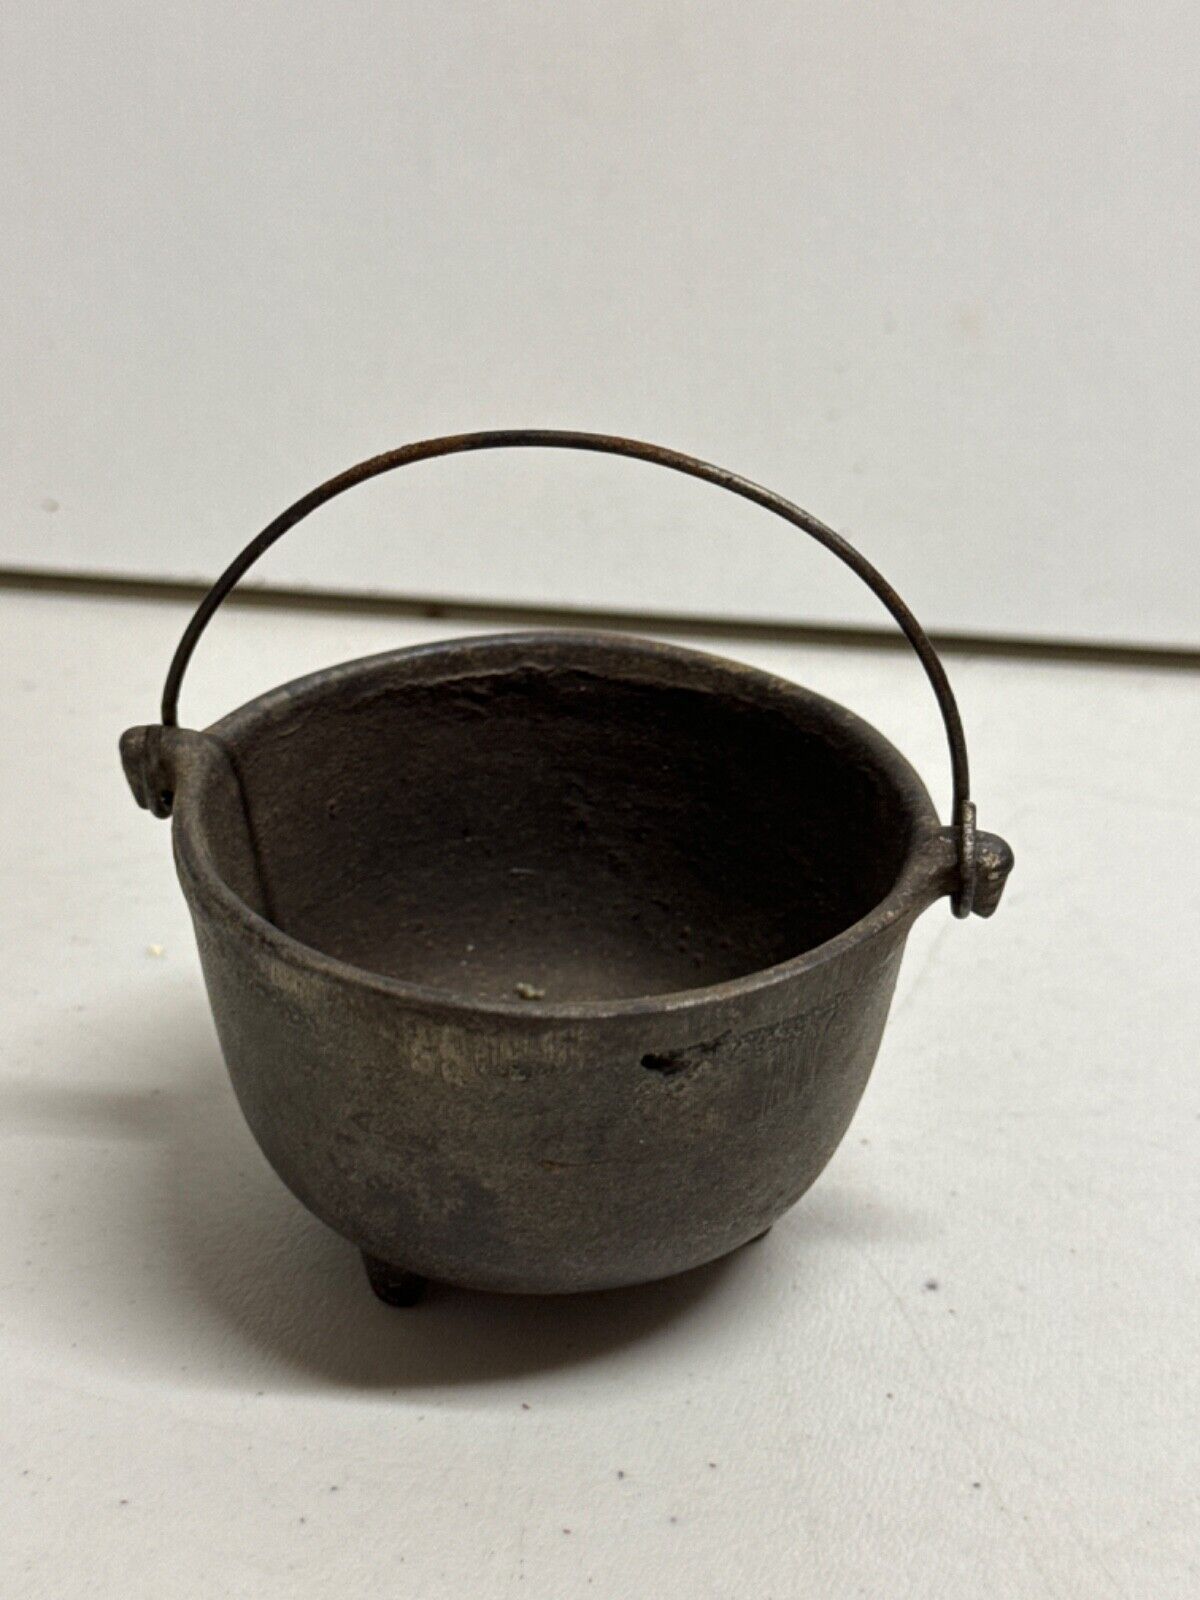 minature footed cast Iron Kettle